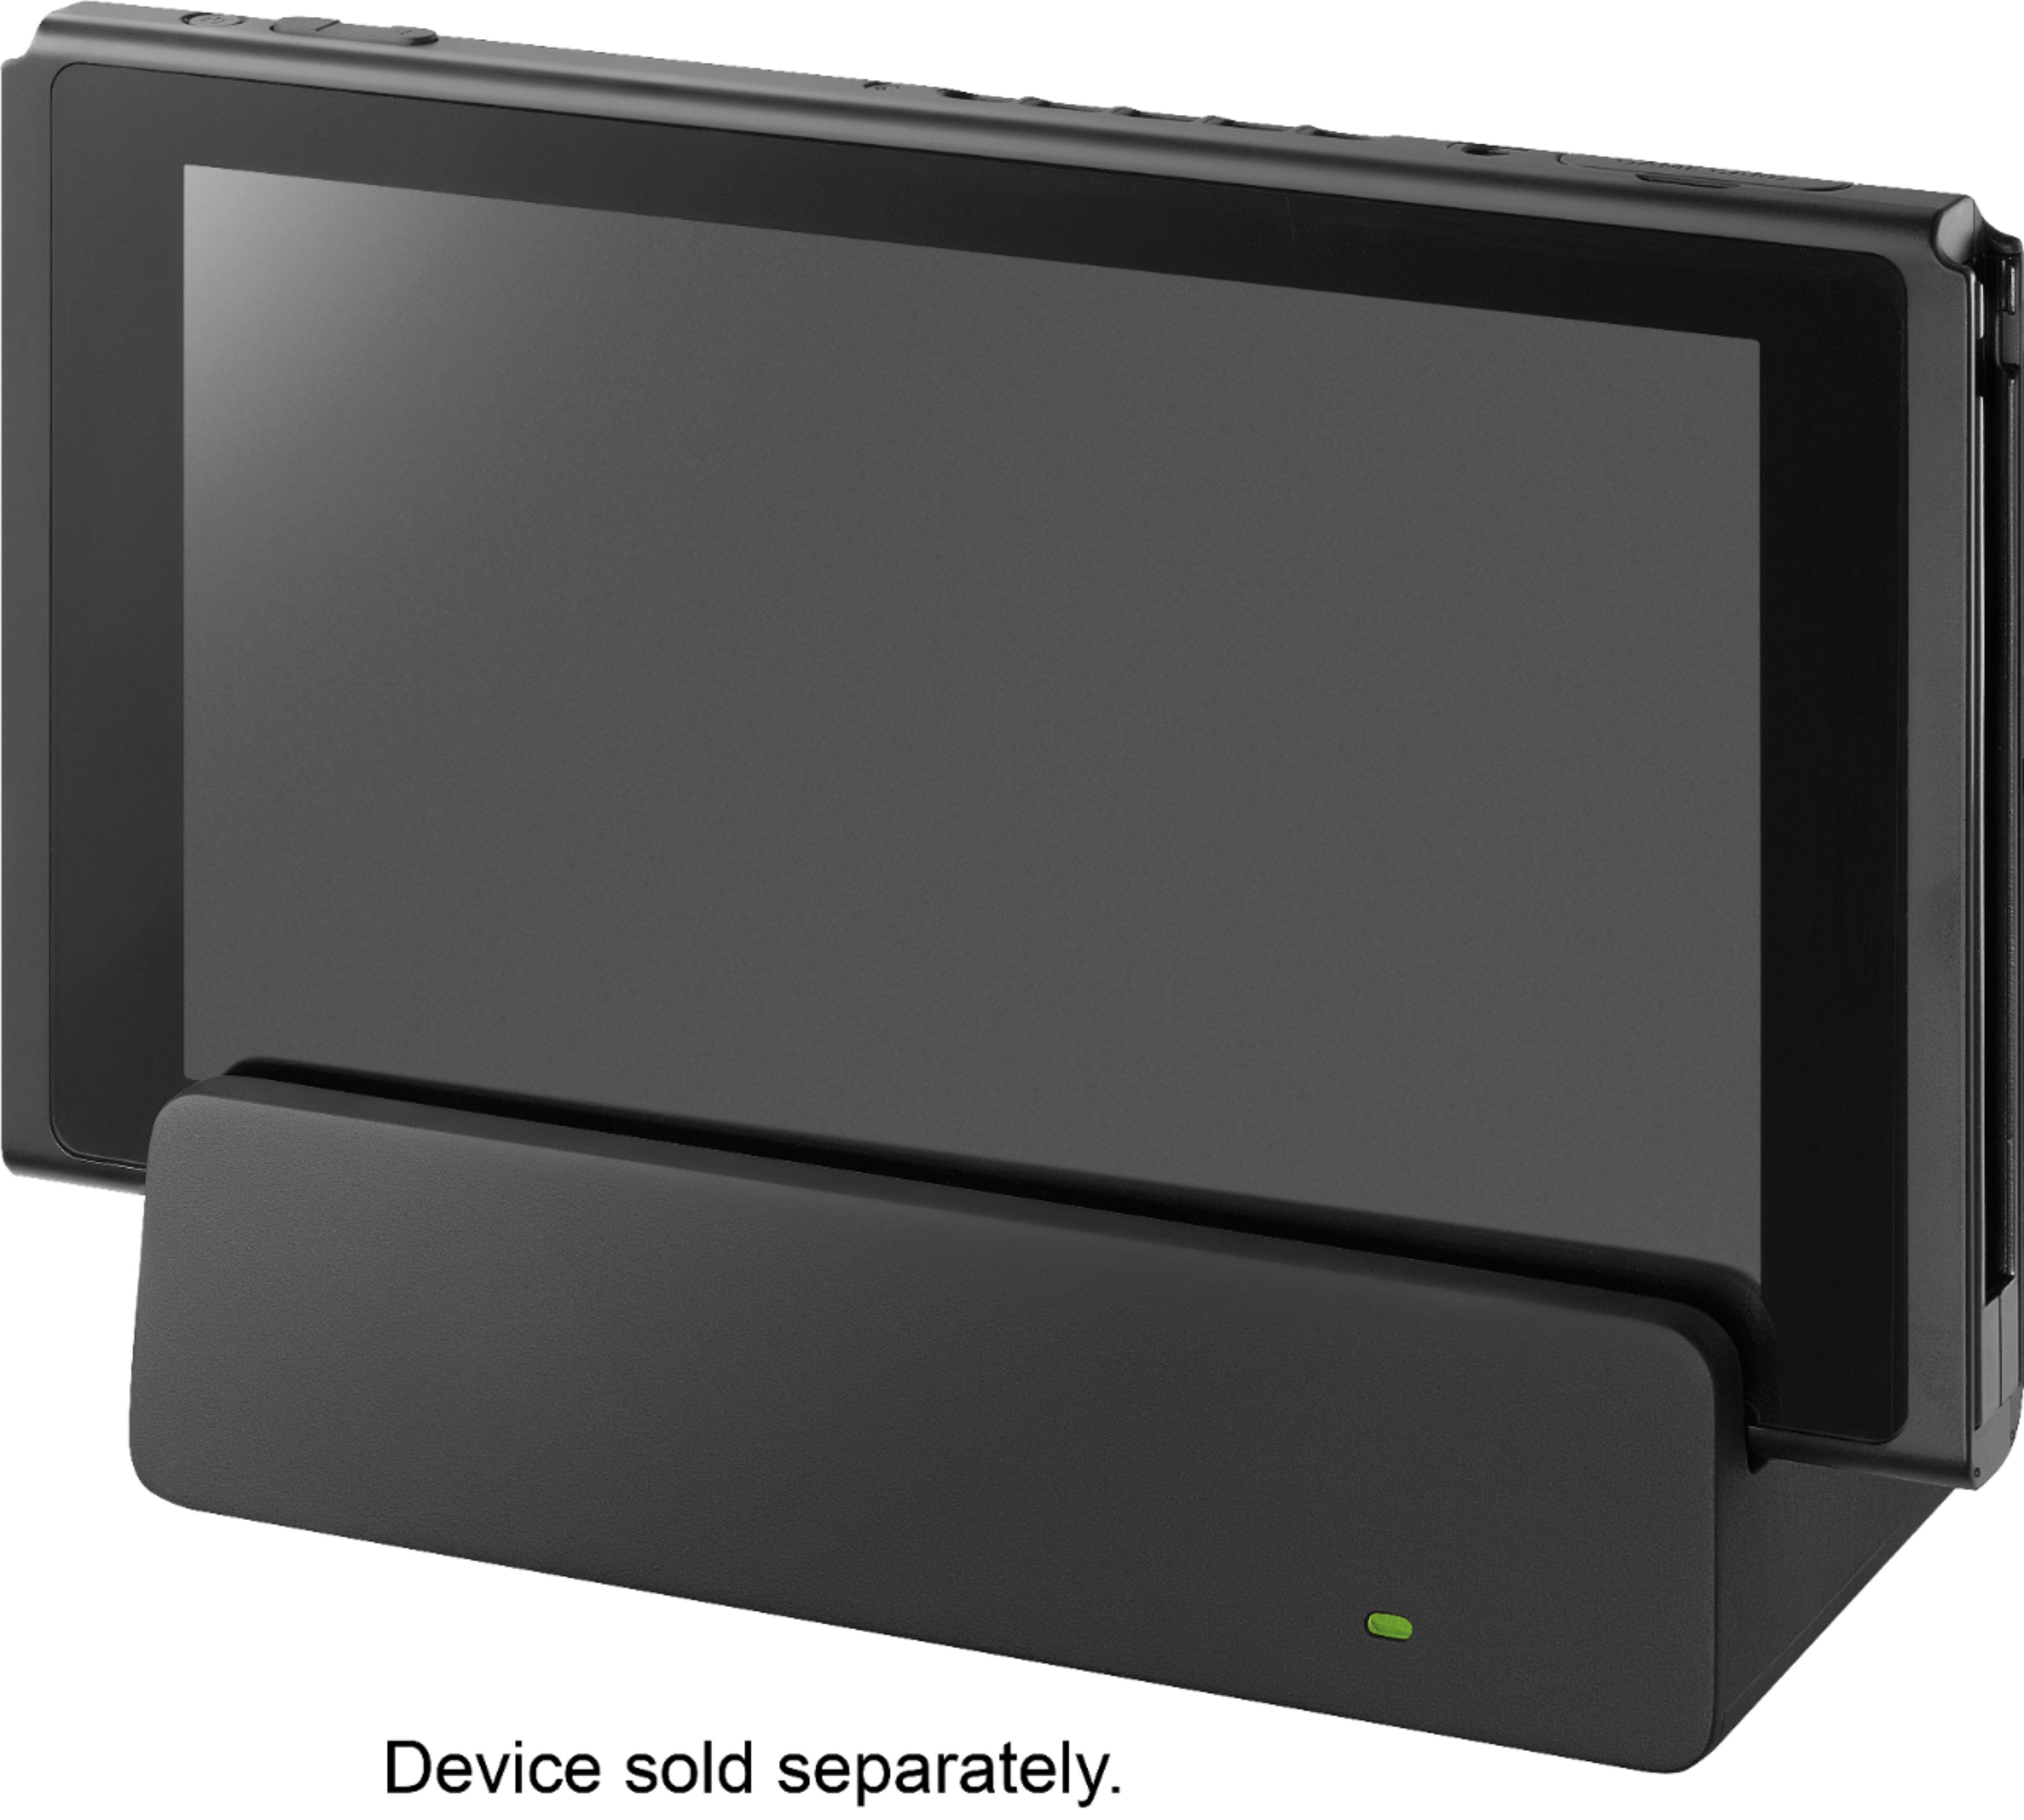 Best Buy: Insignia™ Dock Kit with HDMI and USB for Nintendo Switch